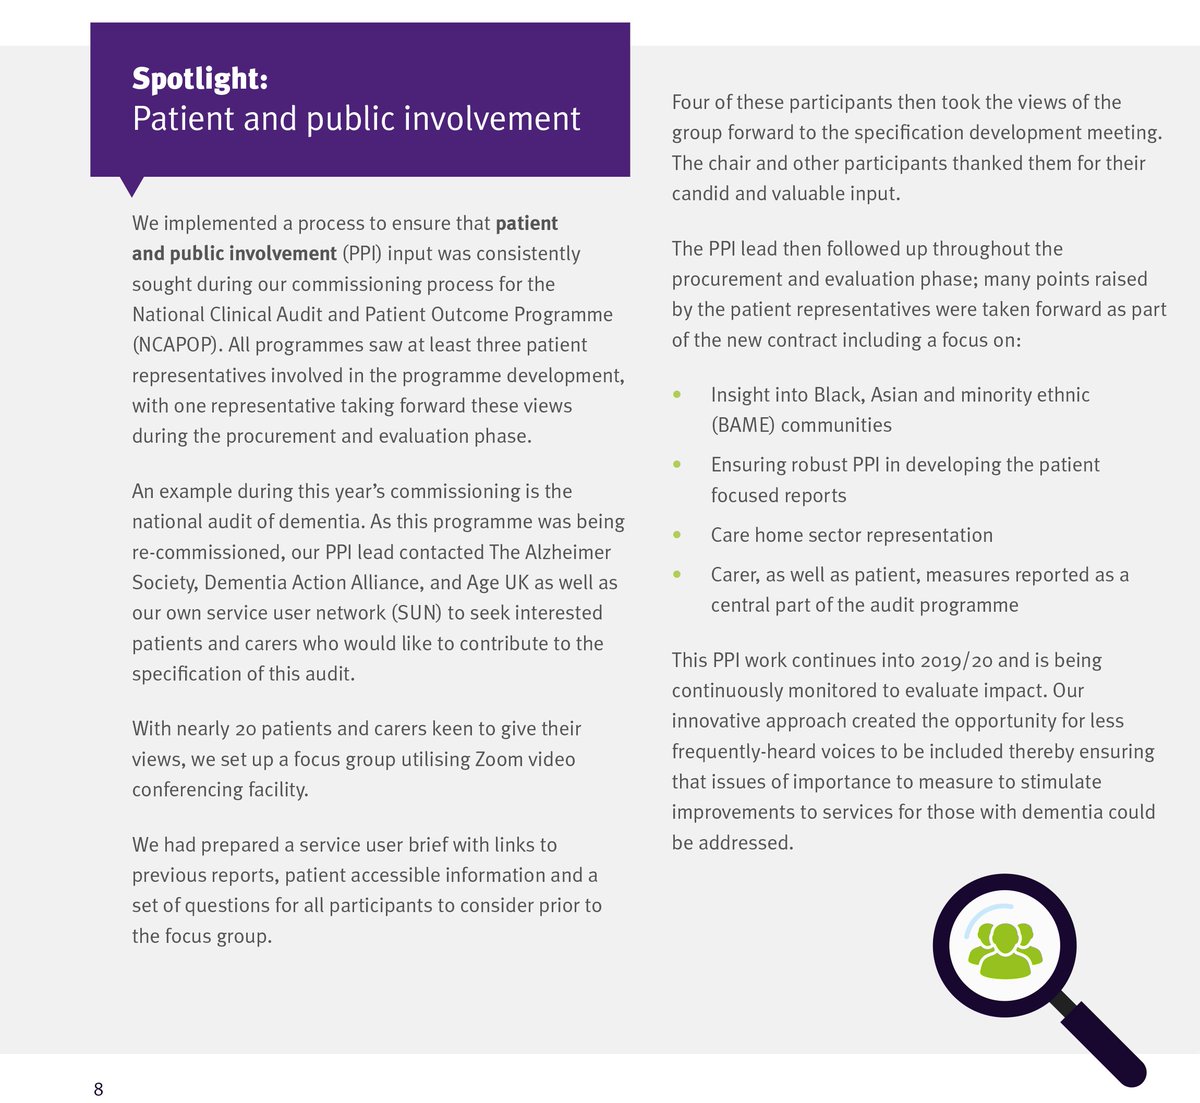 We implemented a process to ensure patient and public involvement (PPI) input was consistently sought during our commissioning process for the National Clinical Audit and Patient Outcome Programme (NCAPOP). This is a spotlight feature in our annual report.  #HQIPAGM19